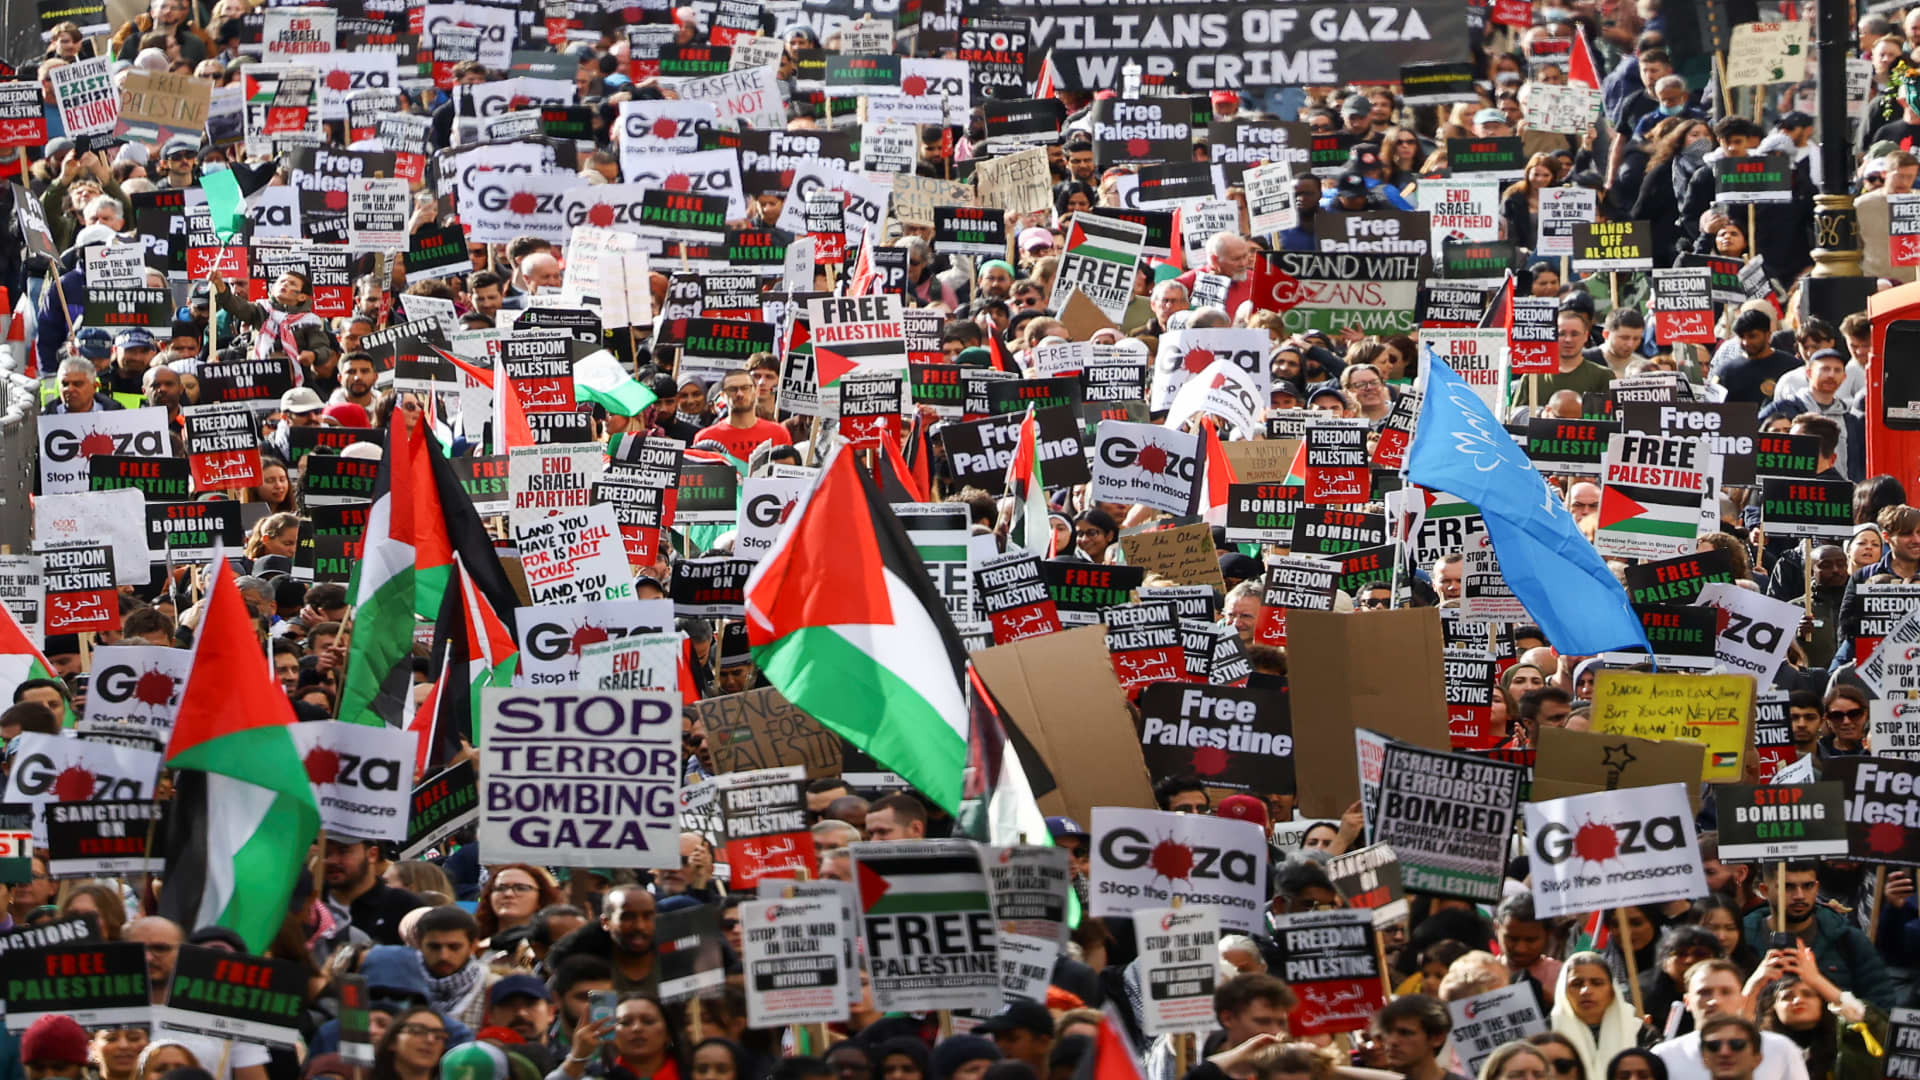 Demonstrators protest in solidarity with Palestinians in Gaza, amid the ongoing conflict between Israel and the Palestinian Islamist group Hamas, in London, Britain, on Oct. 21, 2023.